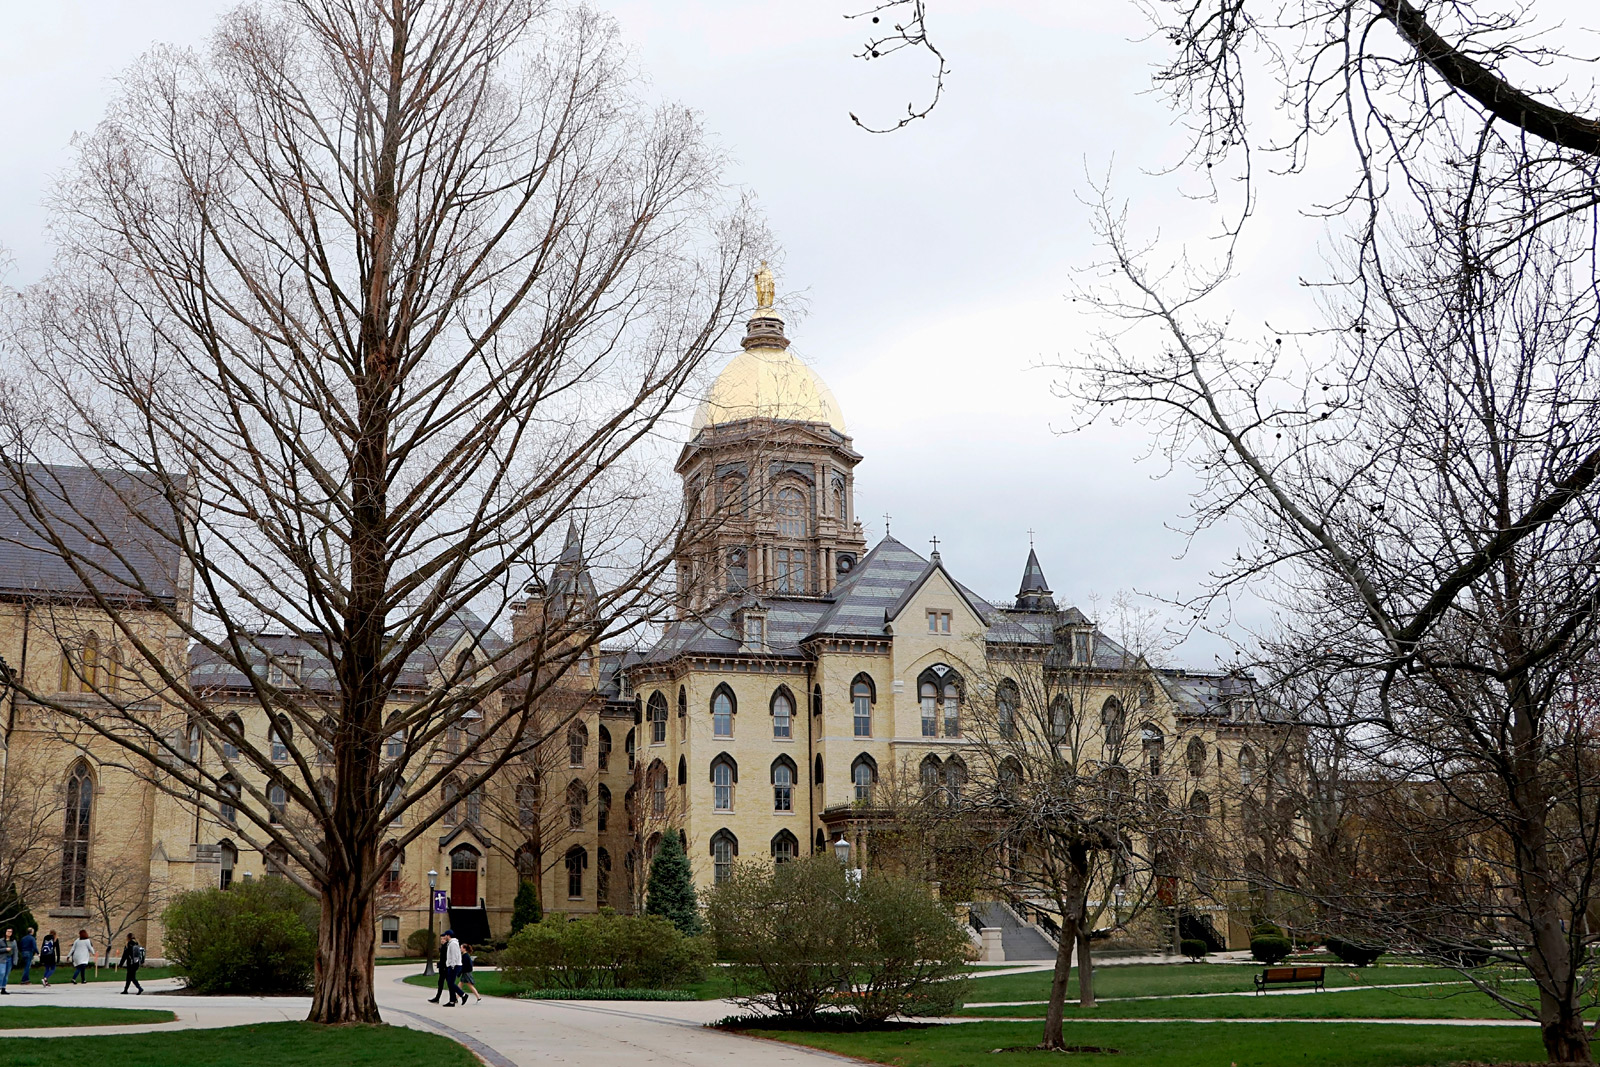 A portion of University of Notre Dame's campus is seen in South Bend, Indiana, on April 19, 2019.